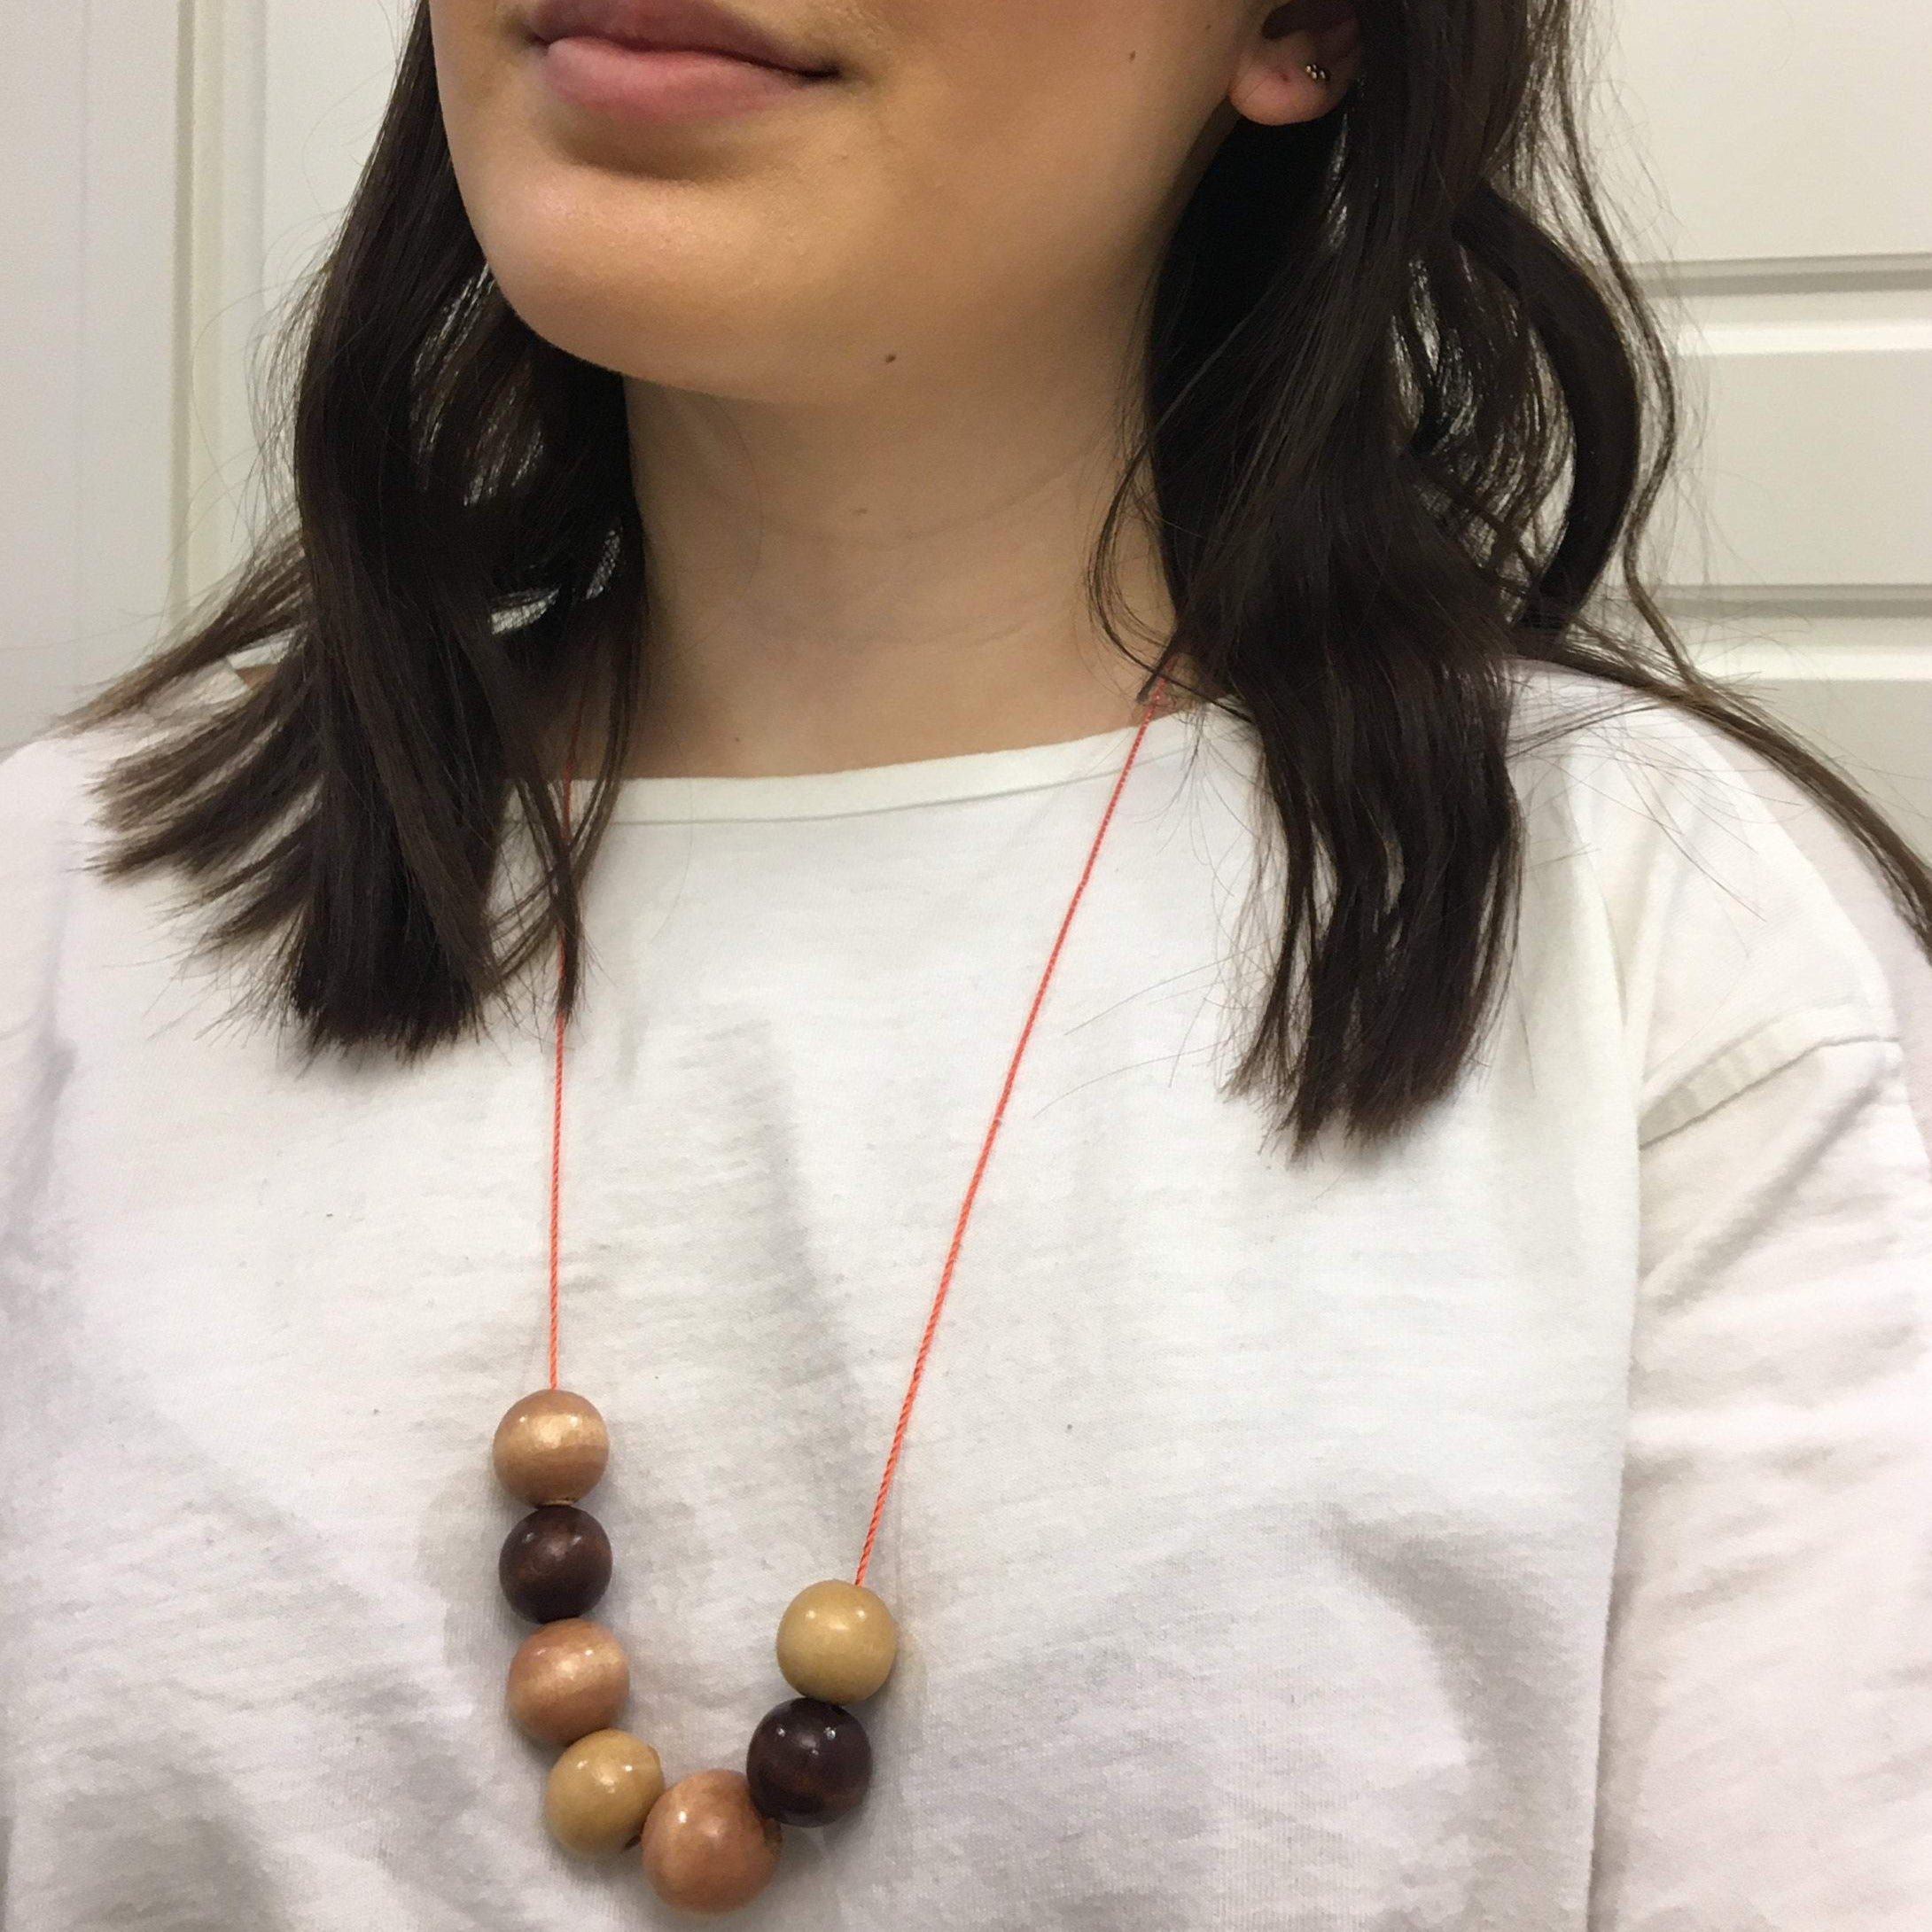 Buy Asymmetrical Orange Wood Bead Necklace Recycled Upcycled Beads  Transparent Elastic Thread and Carabiner Clasp and Silver Ring Online in  India - Etsy